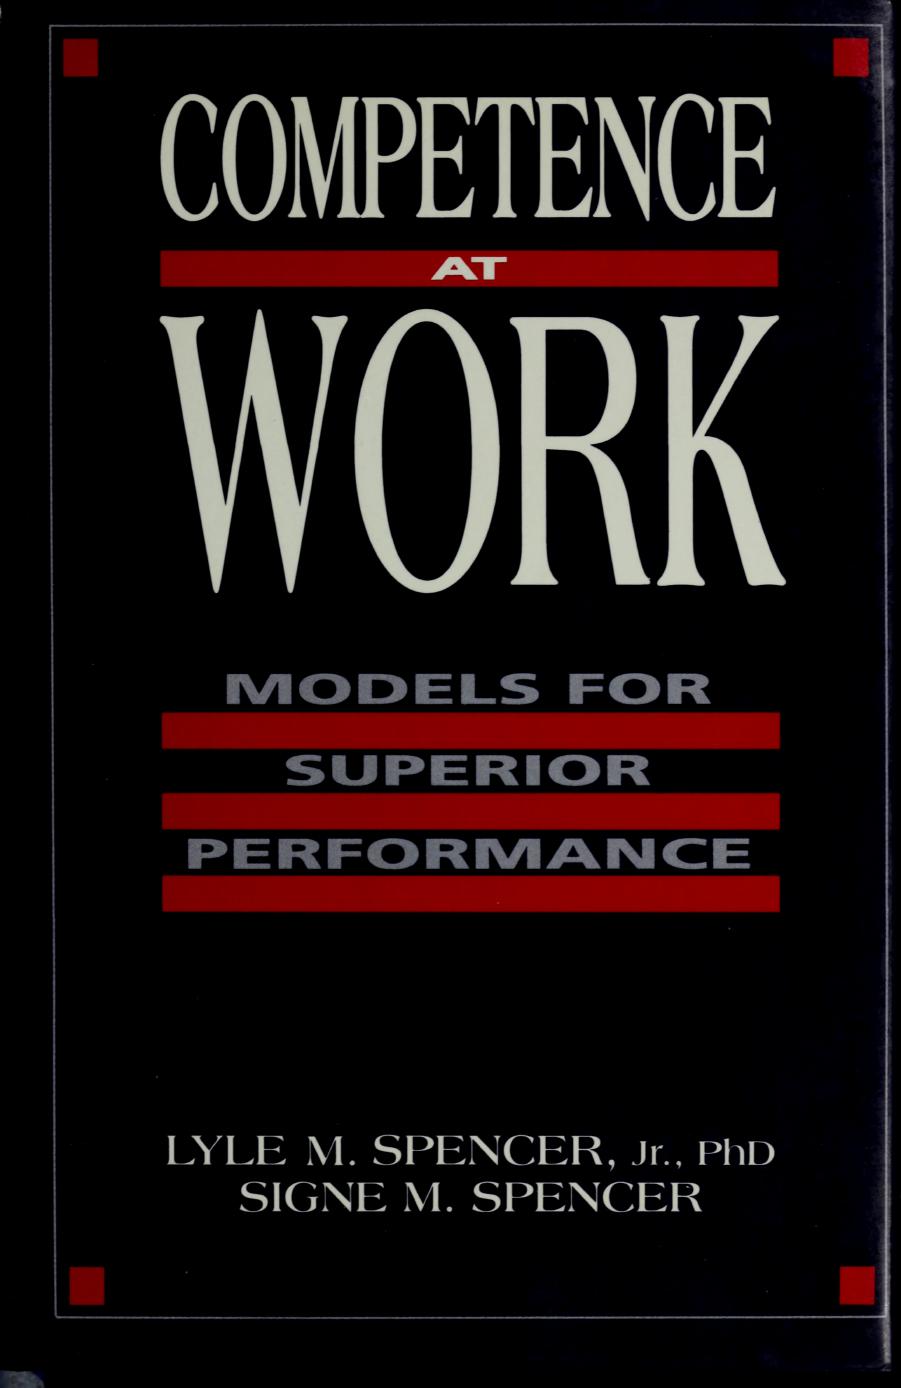 Competence At Work_ Models for Superior Performance.jpg